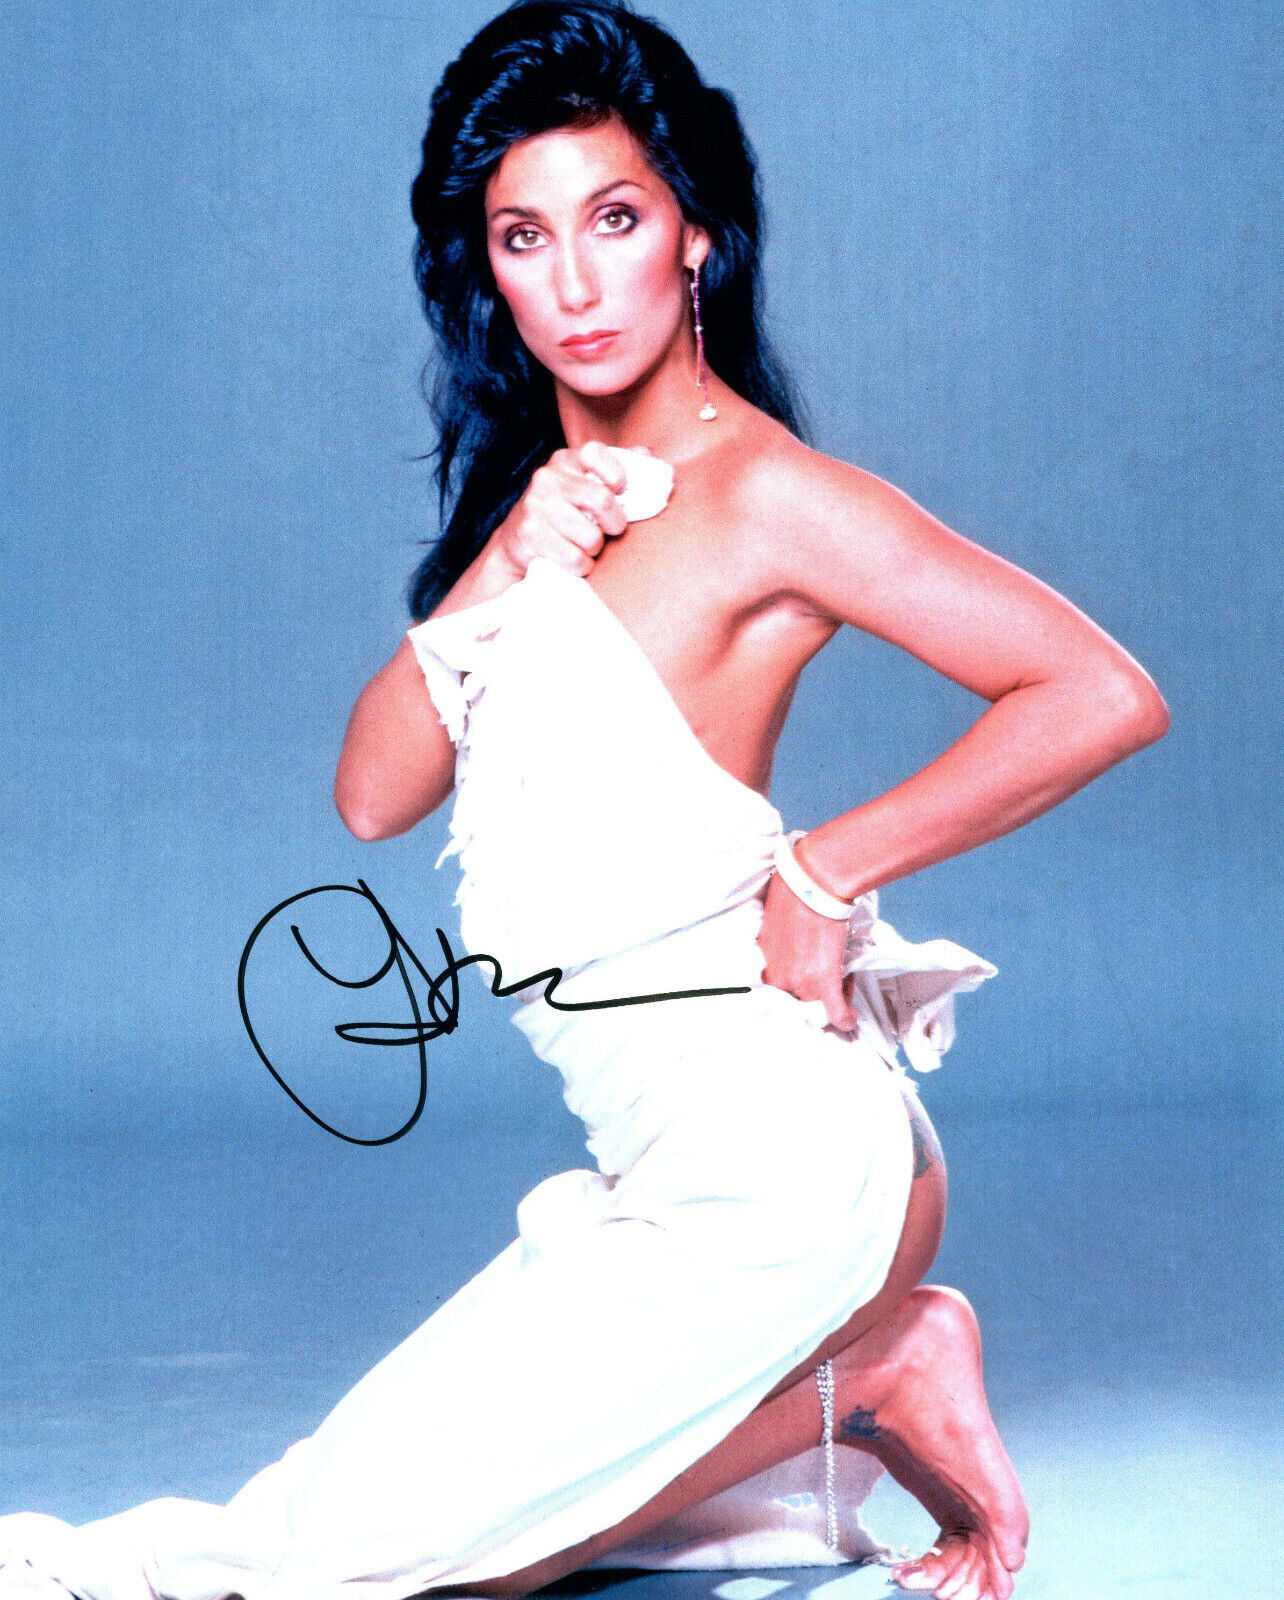 Original Signed Photo Poster painting of Cher 10x8 + COA